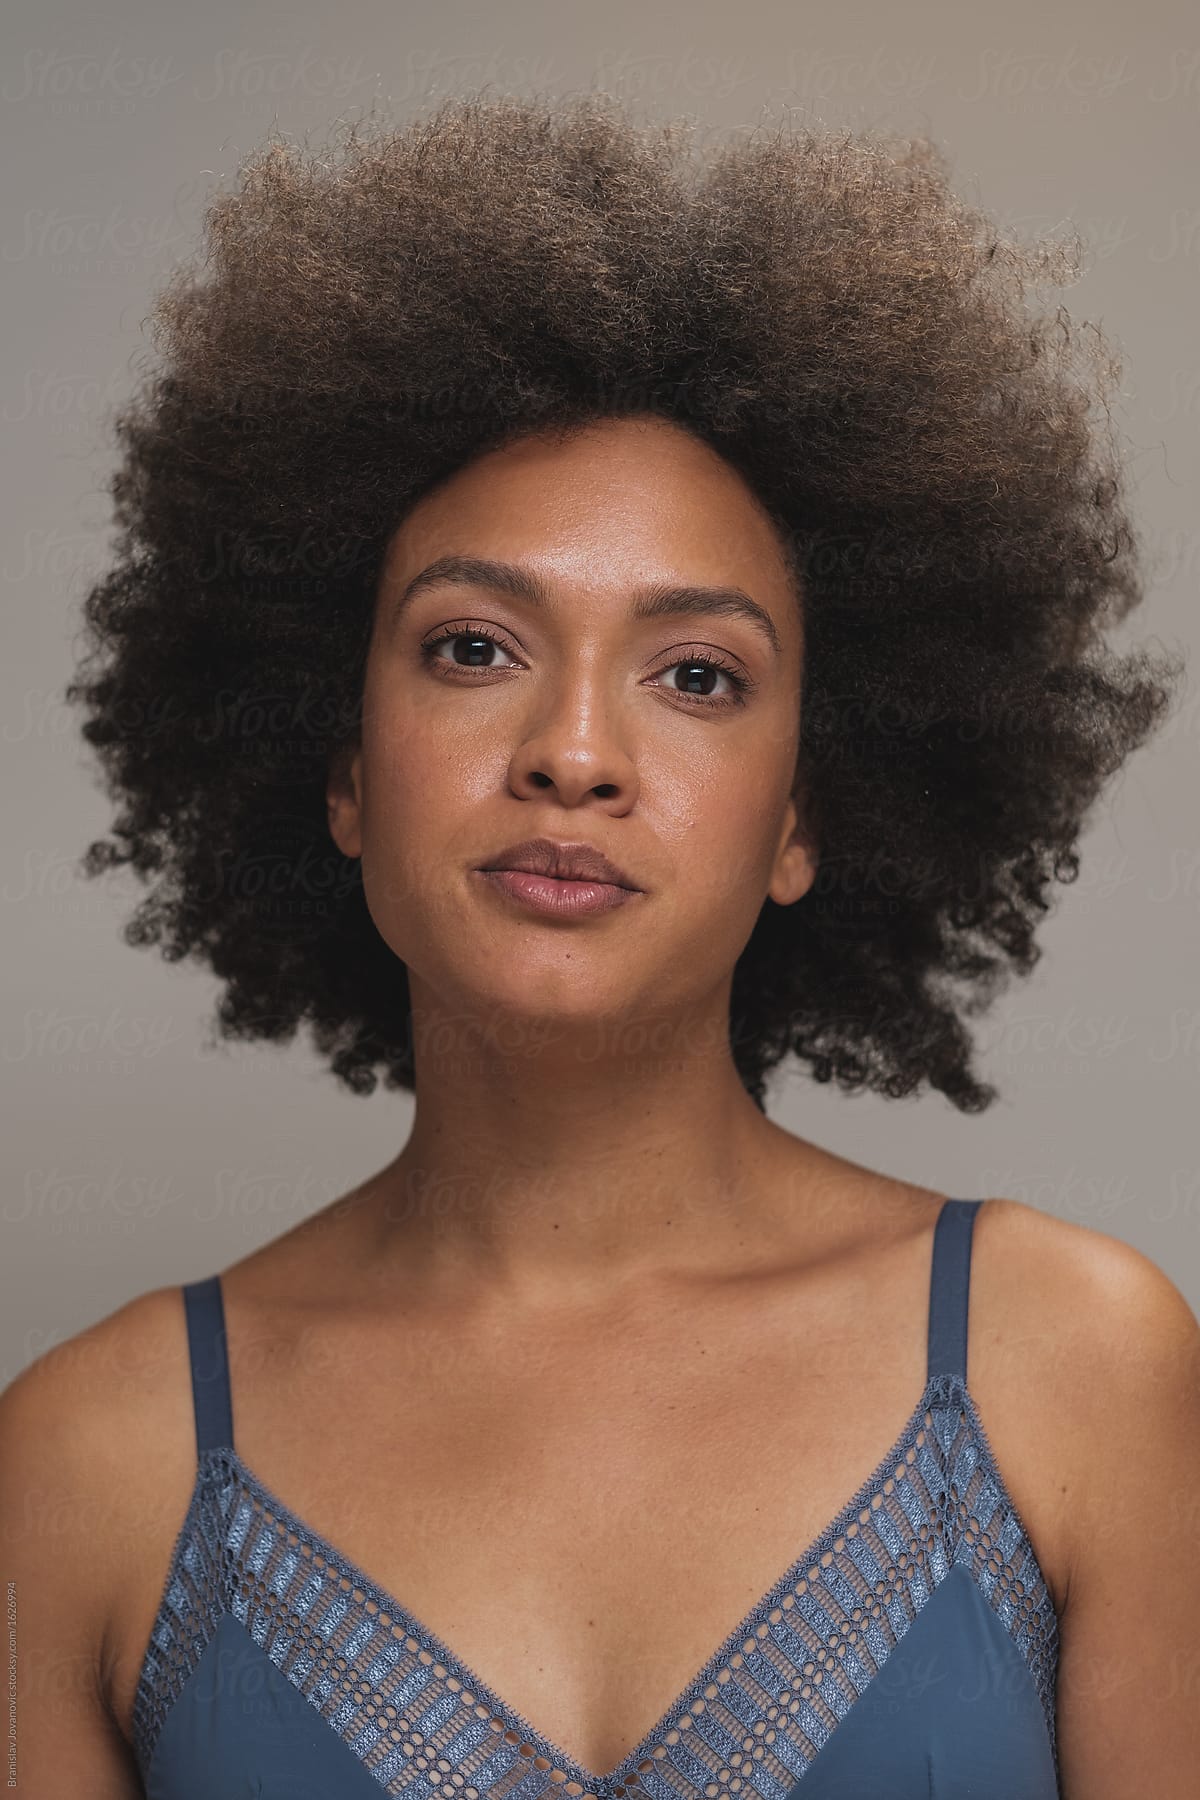 Beautiful Mixed Race Woman With Afro Hairstyle Wearing Bra By Stocksy Contributor Brkati 